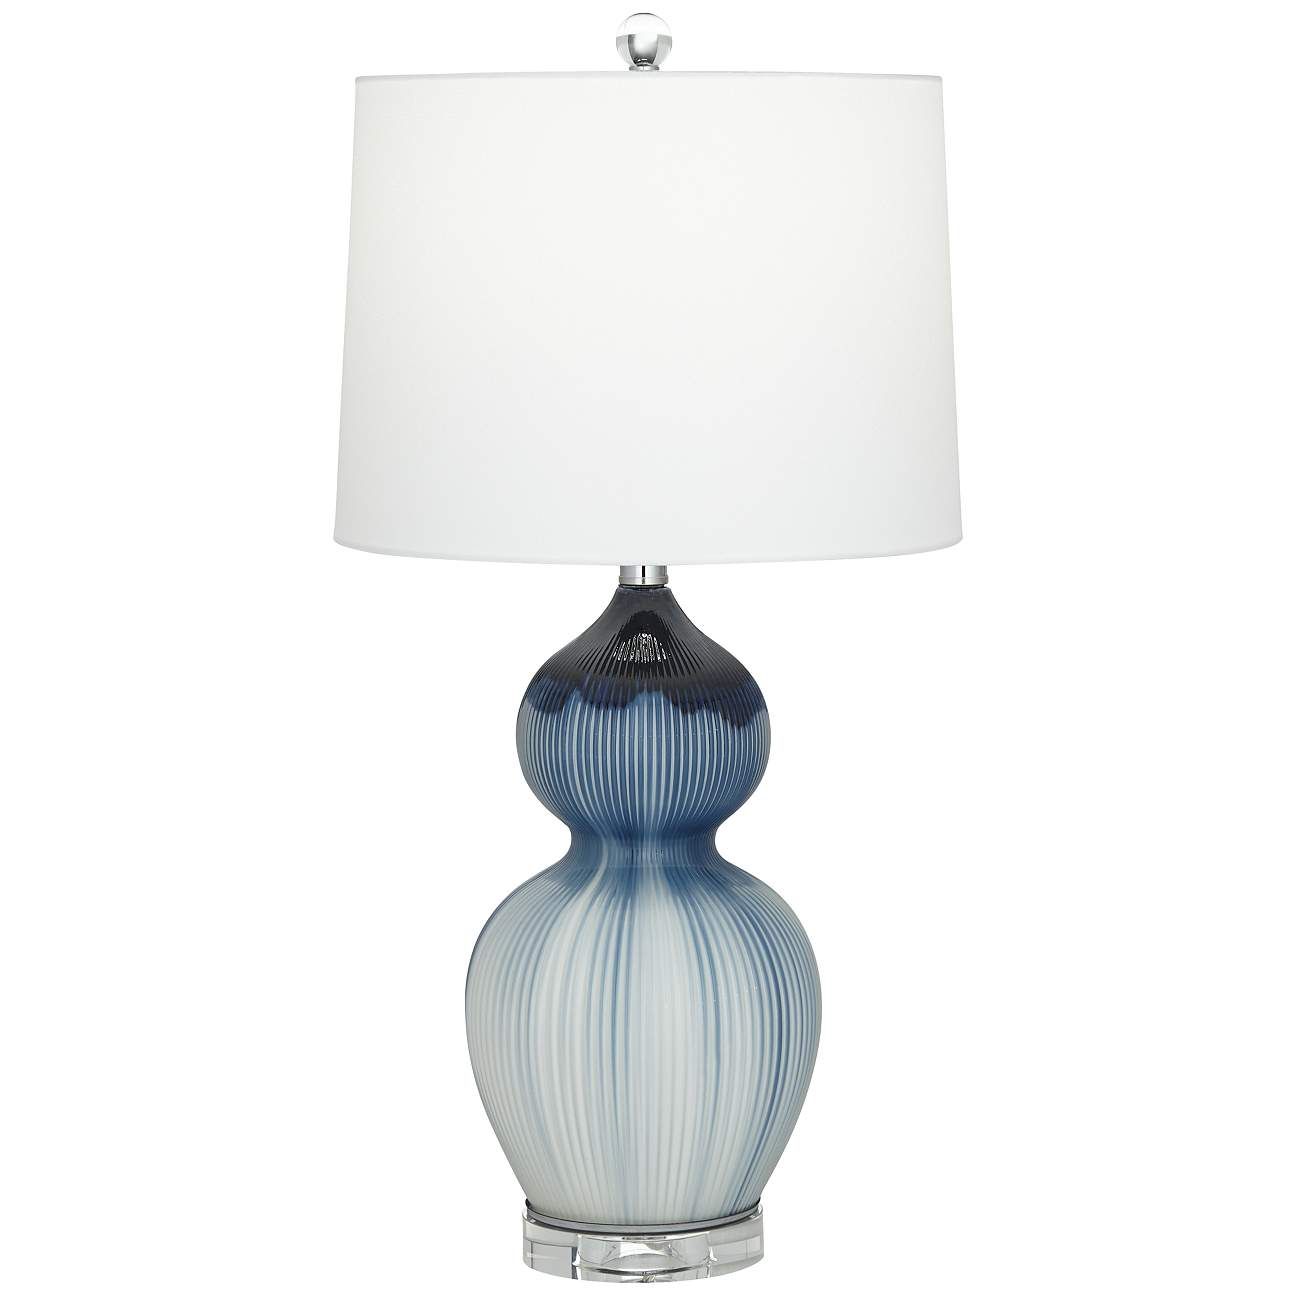 Nadia Blue Double Gourd Modern Glass Table Lamp | Lamps Plus